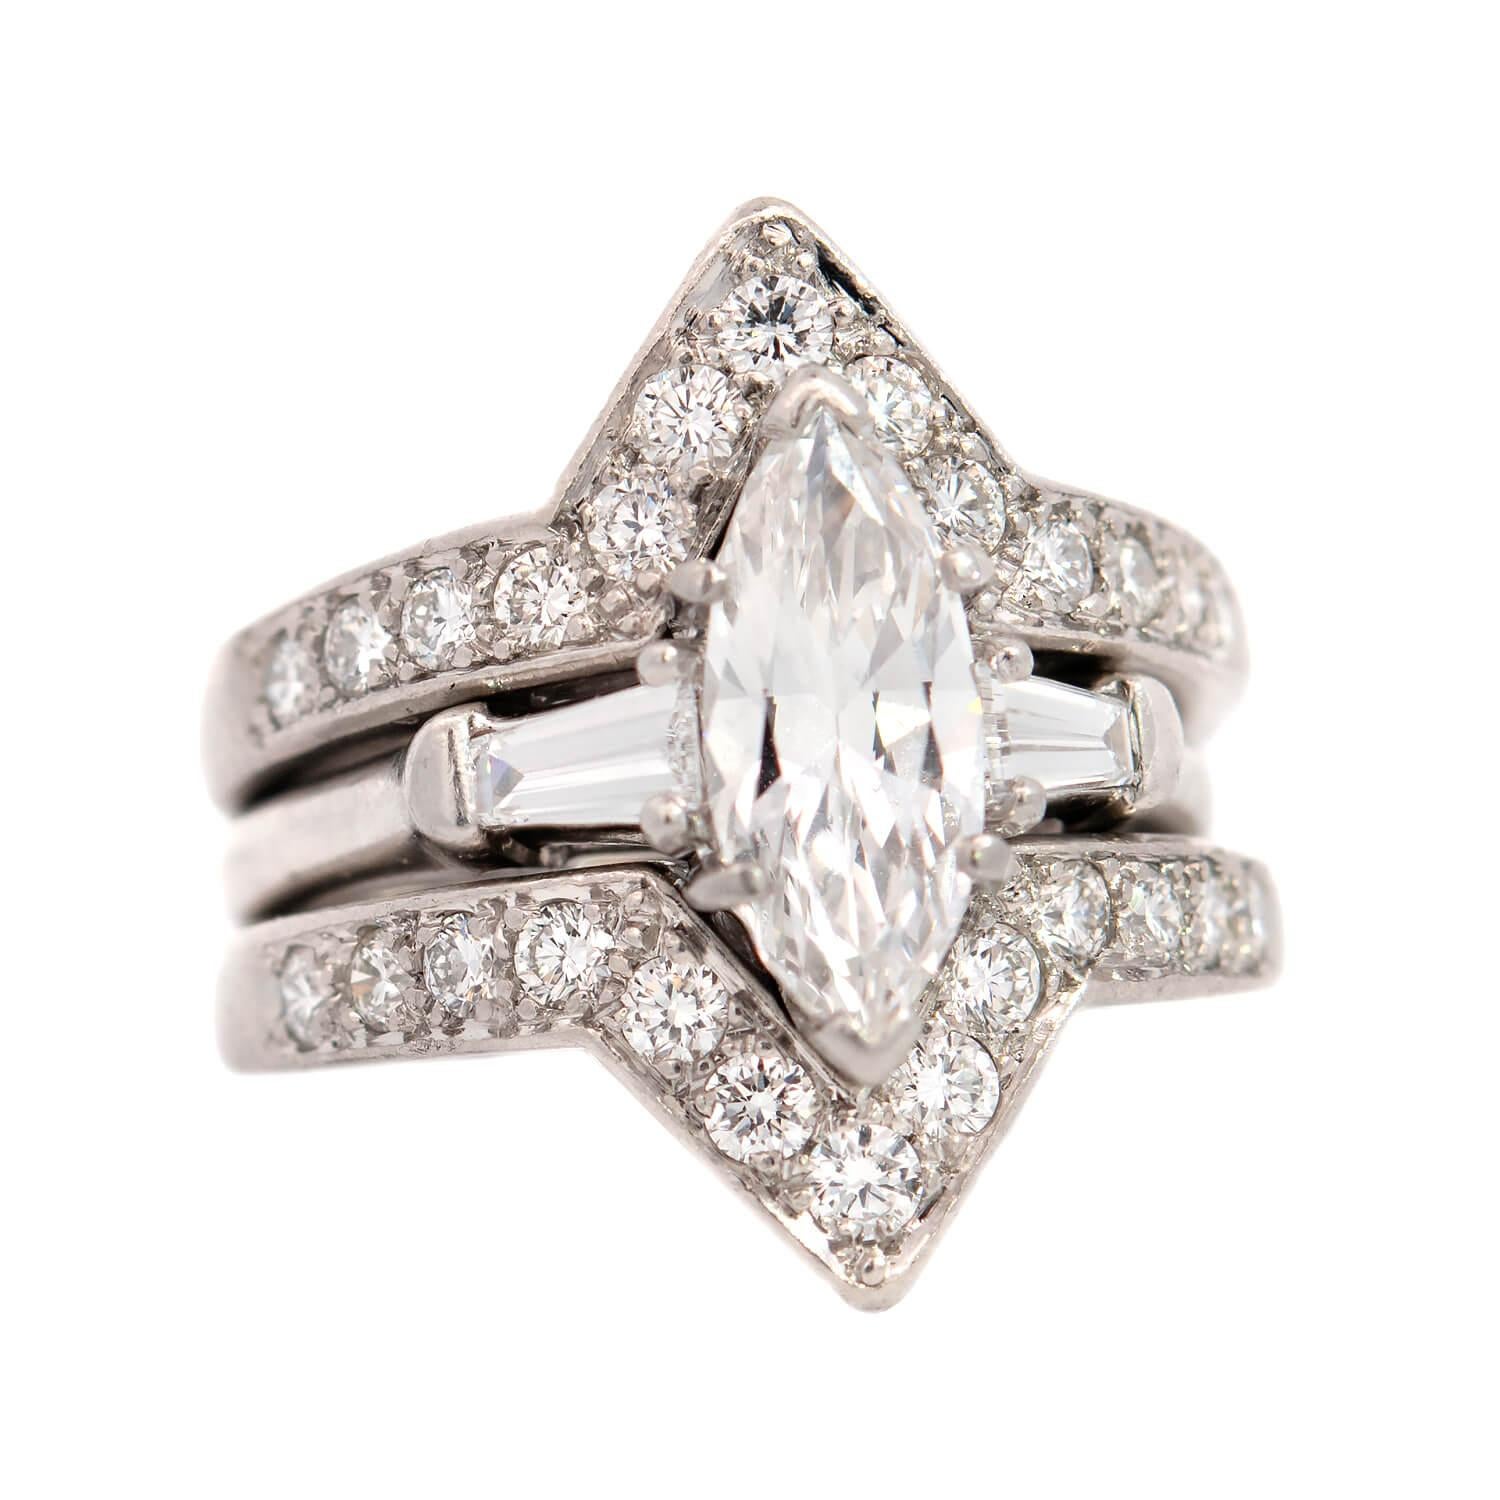 A gorgeous vintage diamond engagement ring with two fitted ring guards from the 1960s by legendary designer OSCAR HEYMAN! This unique trio of rings is composed of platinum, and the central marquise diamond in the engagement ring weighs 1.00ct with G